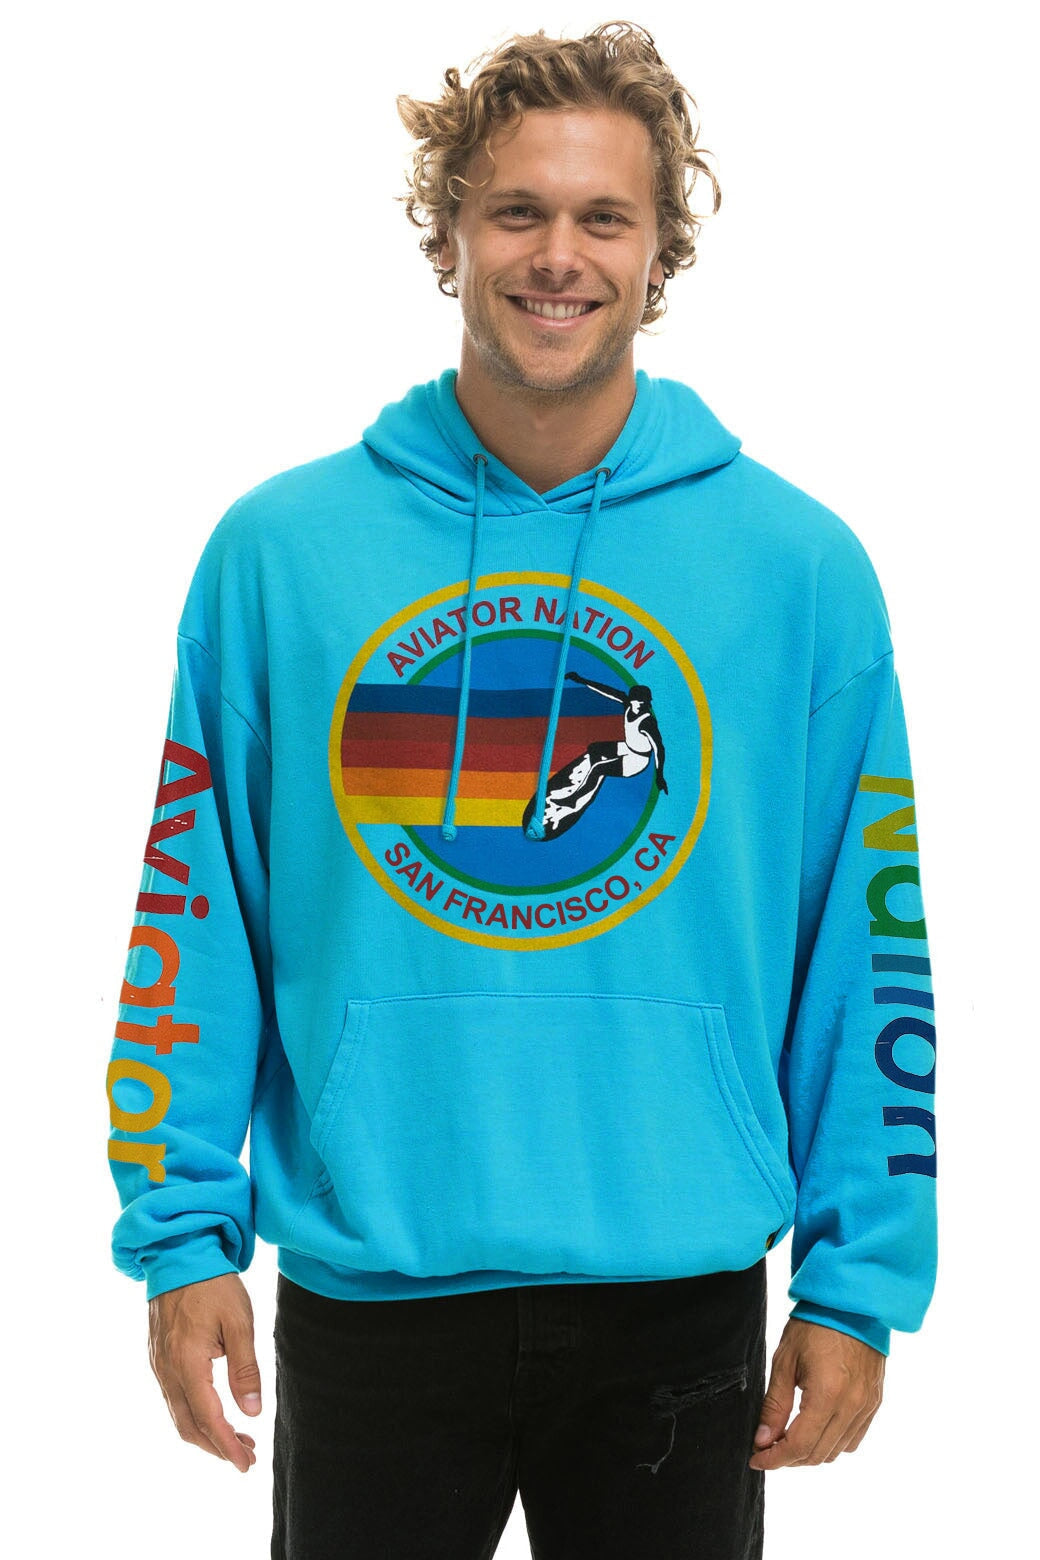 AVIATOR NATION SAN FRANCISCO RELAXED PULLOVER HOODIE - NEON BLUE Hoodie Aviator Nation 